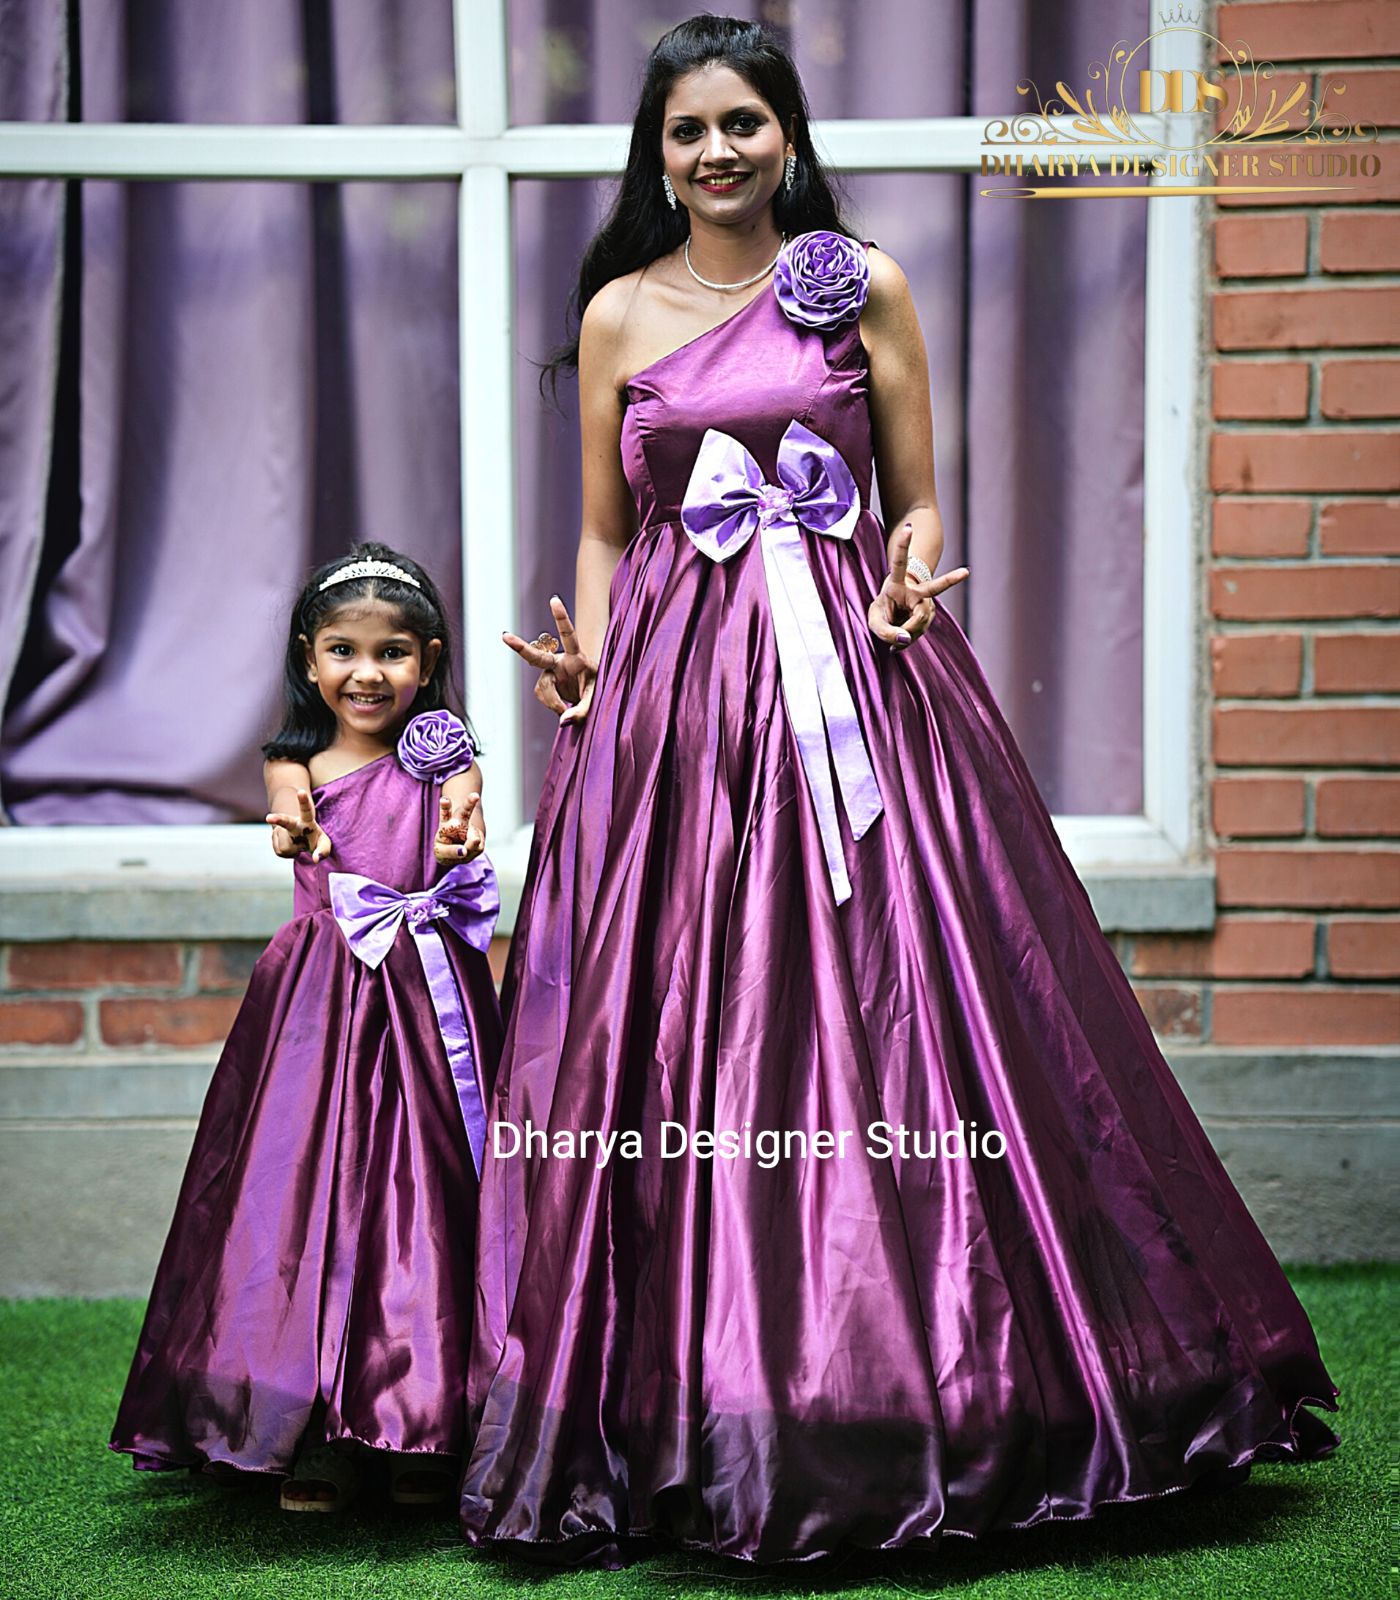 Photo Shoot Mother and Daughter Dresses Blush Matching Dresses Photo Props  Maternity Lace Dresses Mommy and Me Dresses Maternity Photoshoot -  UK